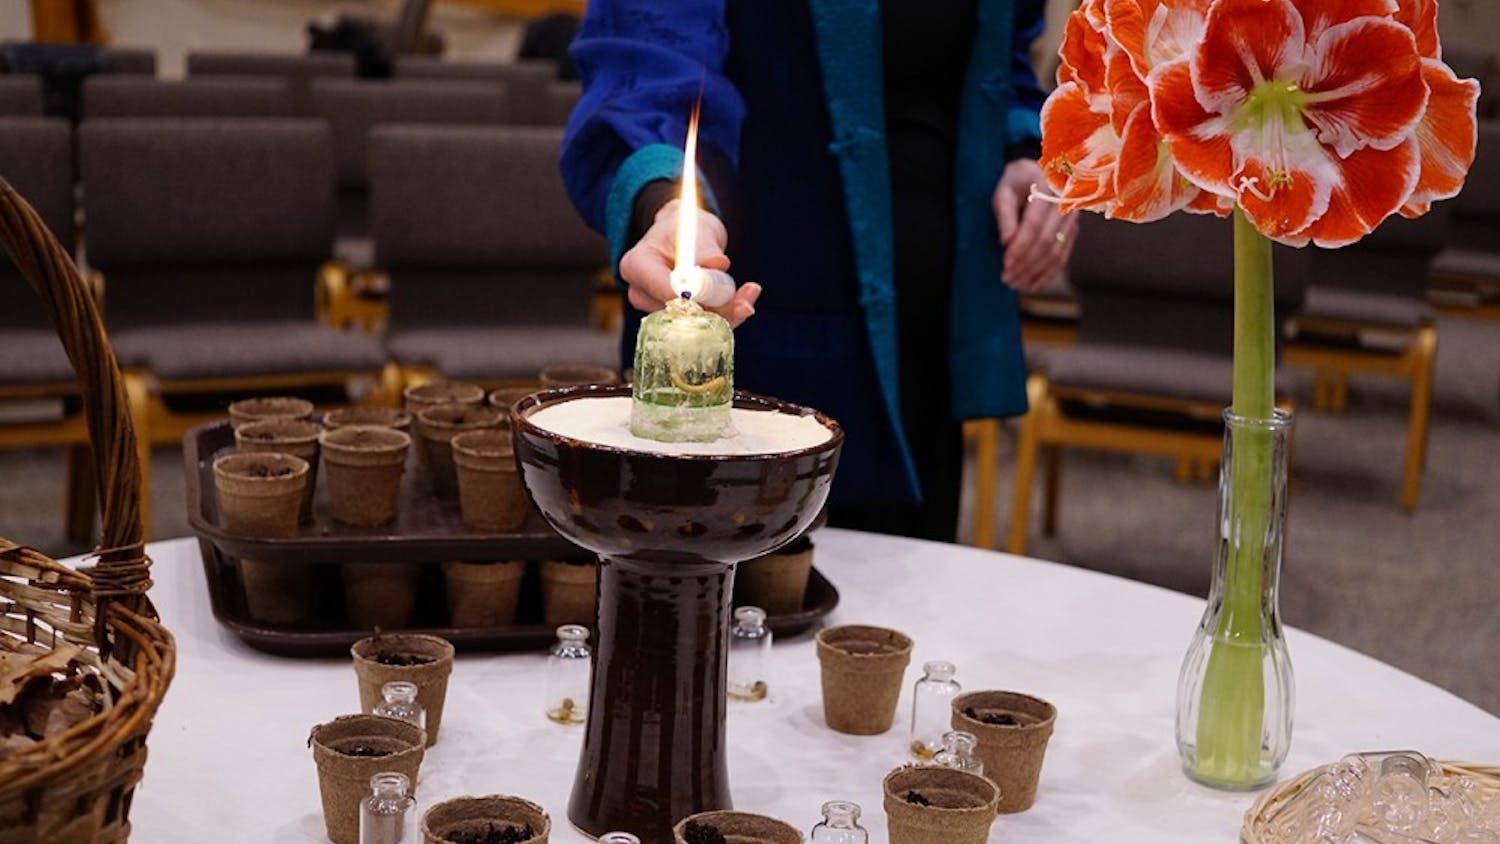 A candle is lit after the spring equinox celebration Monday evening&nbsp;at the Unitarian Universalist Church. Spring equinox is the beginning of the spring season.